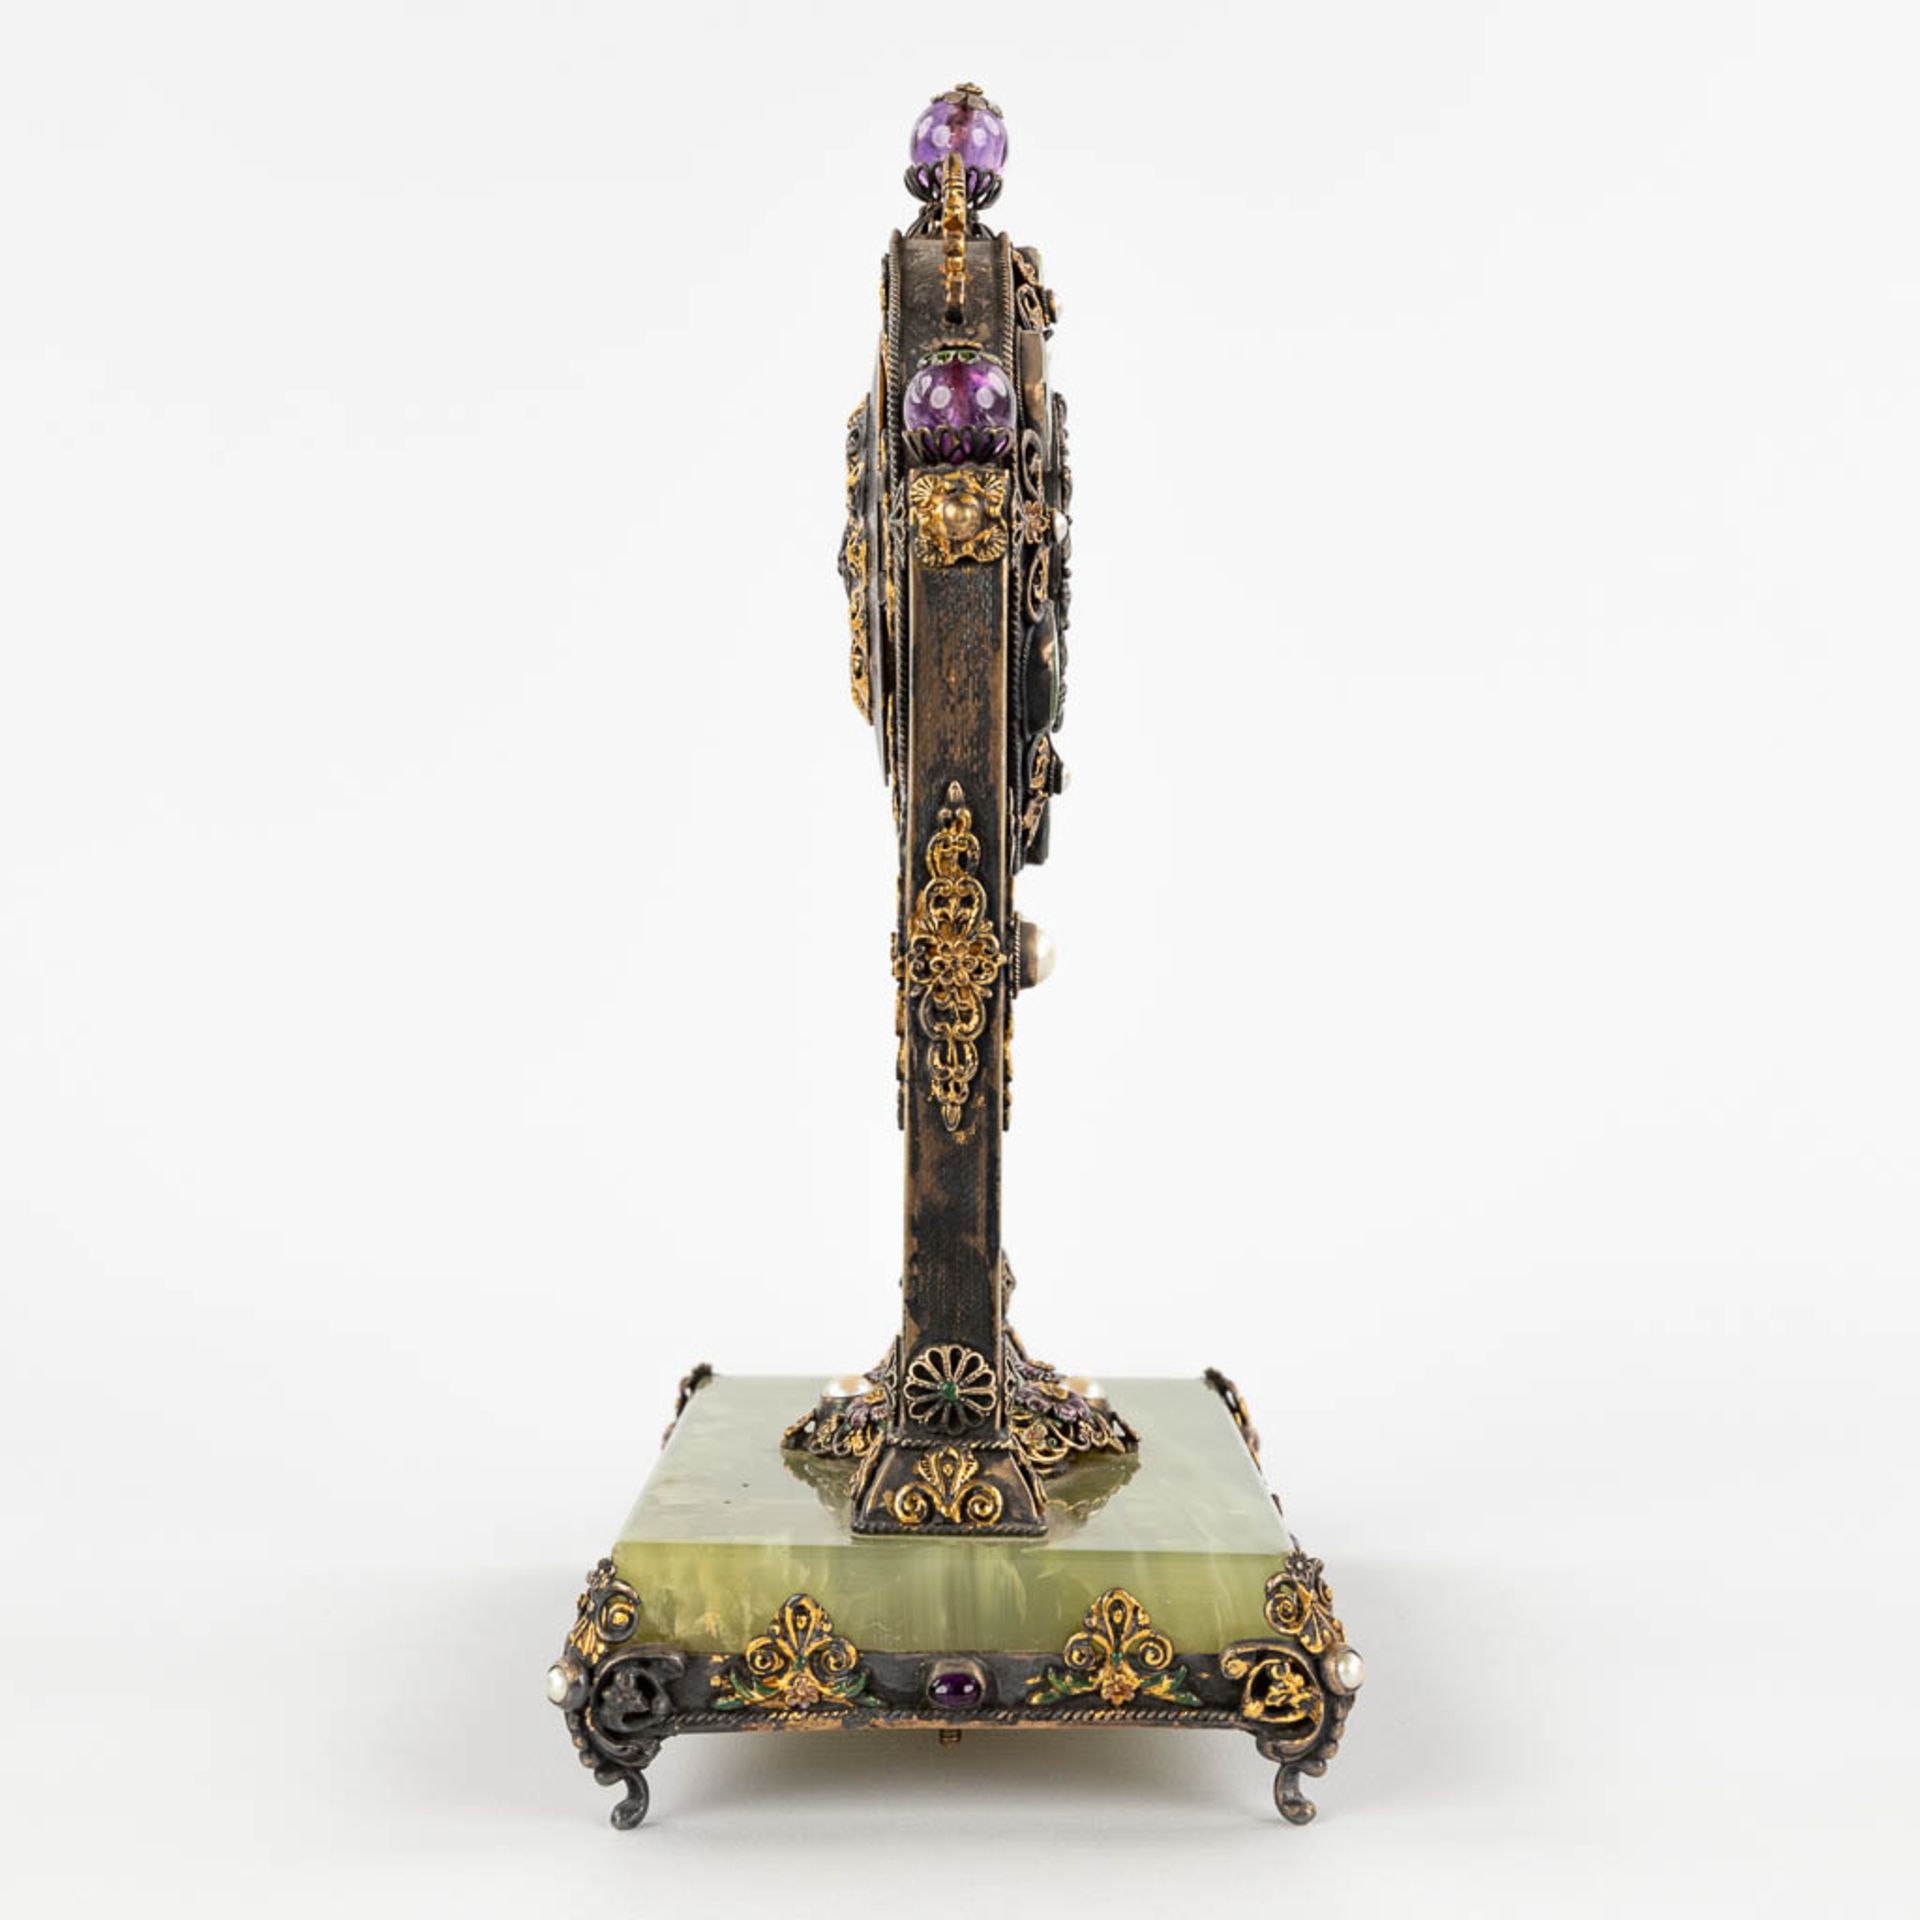 A mantle clock, silver and gold-plated metal and decorated with stone and onyx, pearls. Circa 1900. - Image 4 of 14